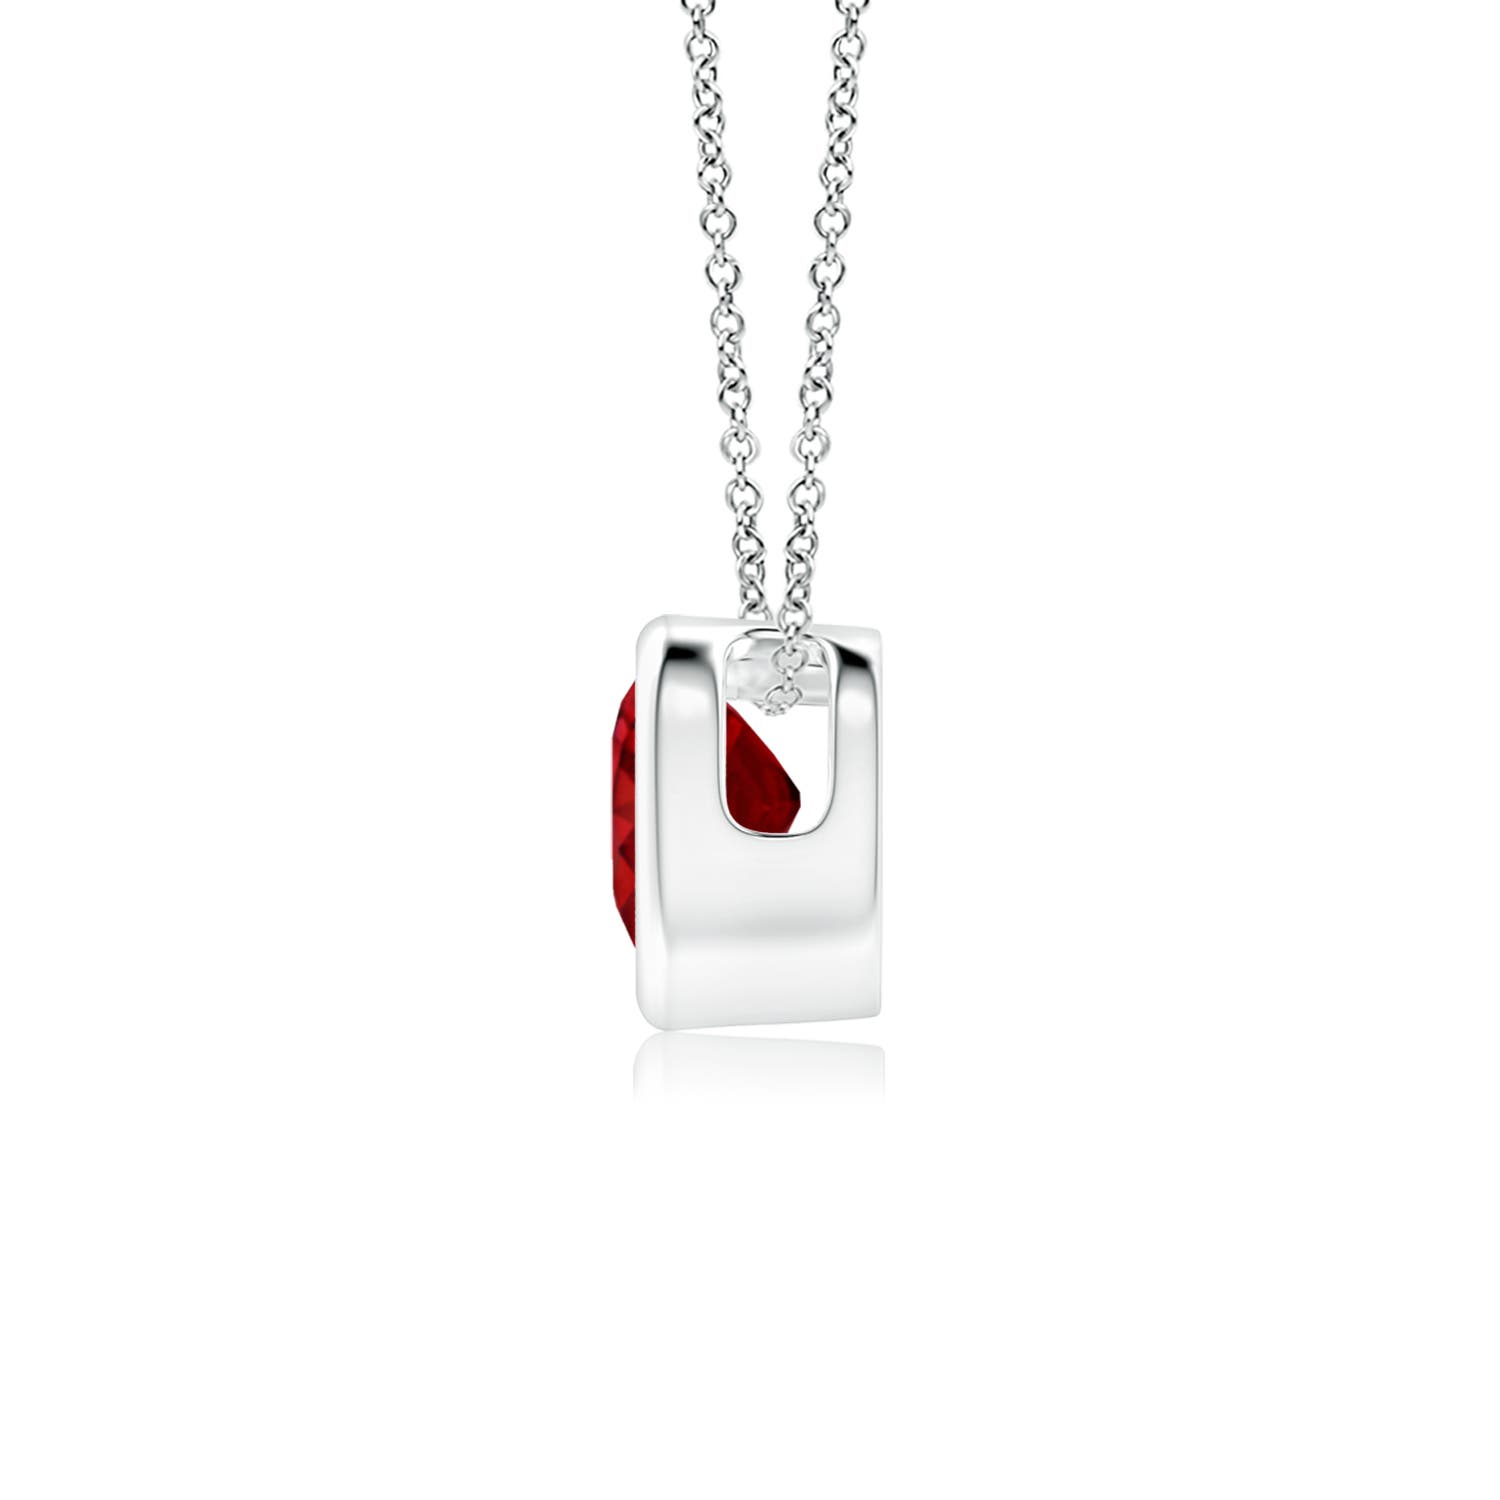 AAAA - Ruby / 0.3 CT / 14 KT White Gold